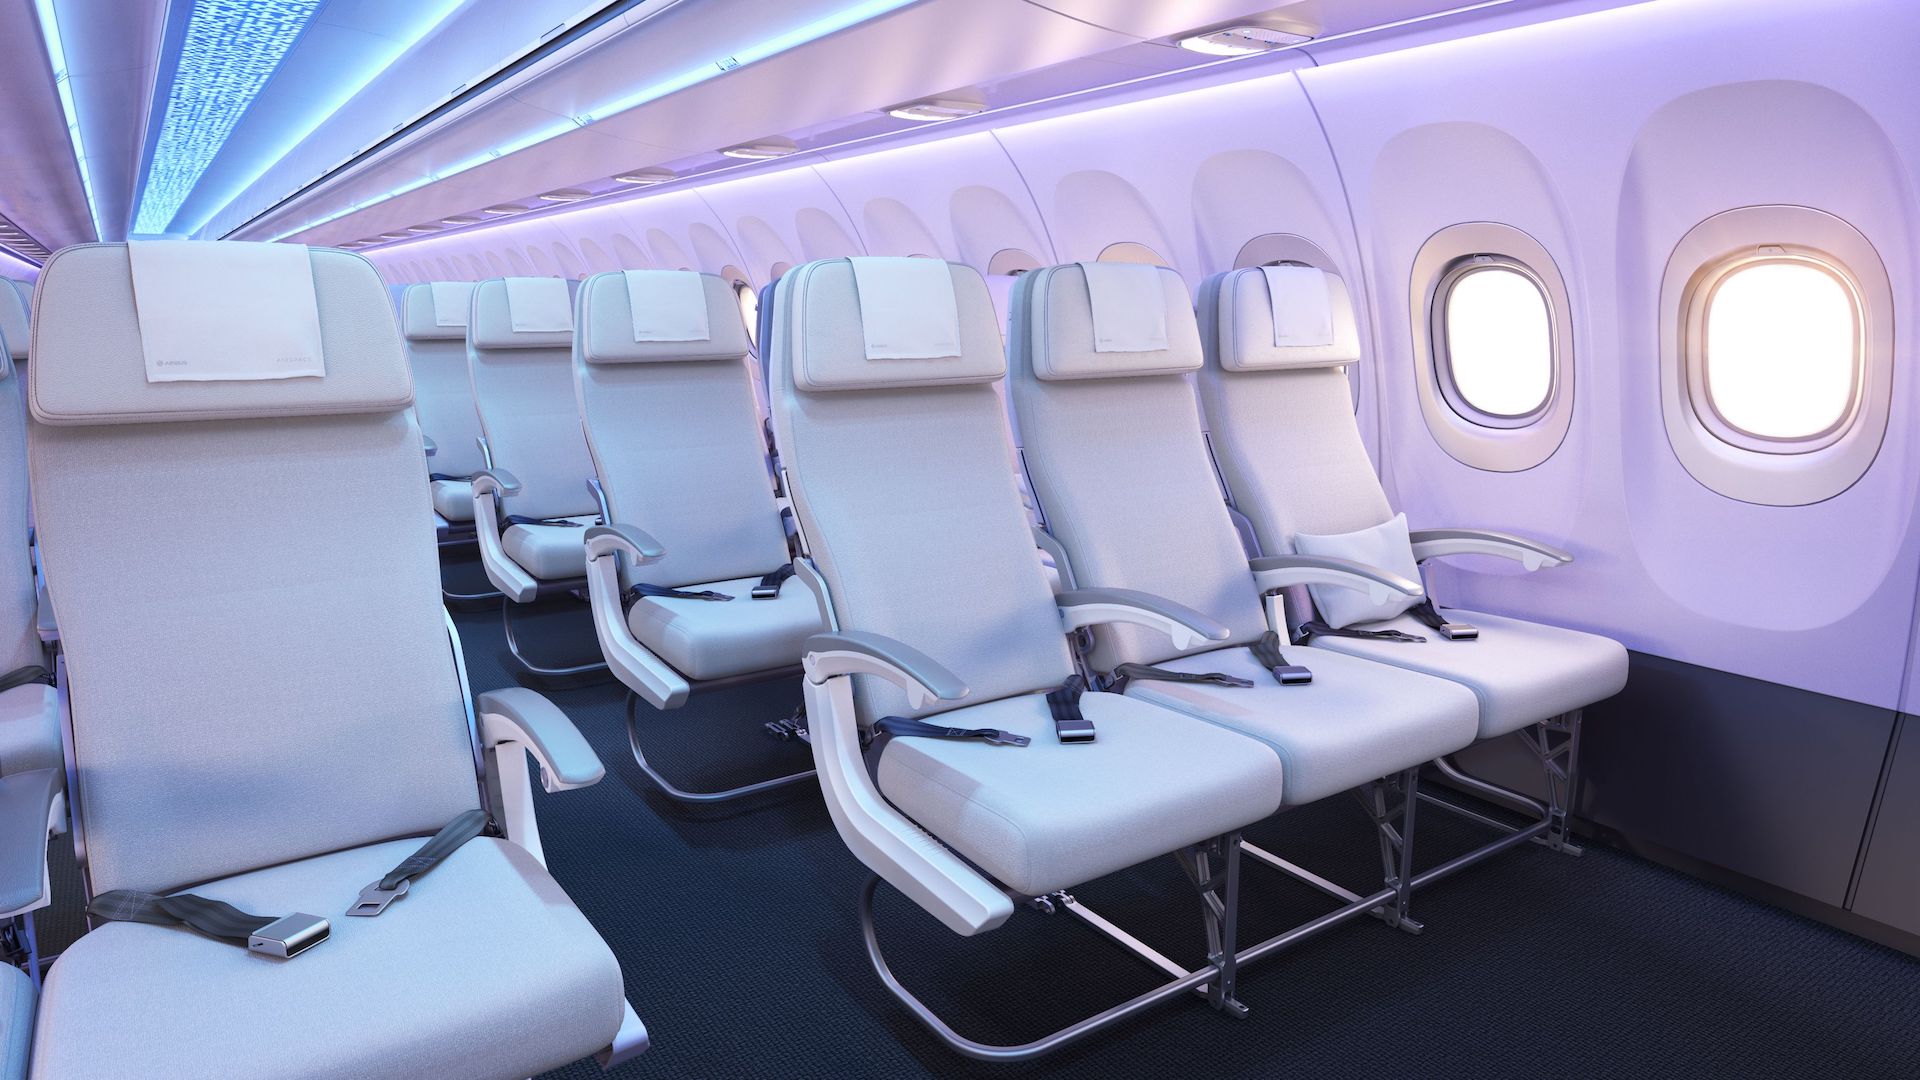 New Airbus A320 Airspace interior set to debut in 2020 - Bangalore Aviation